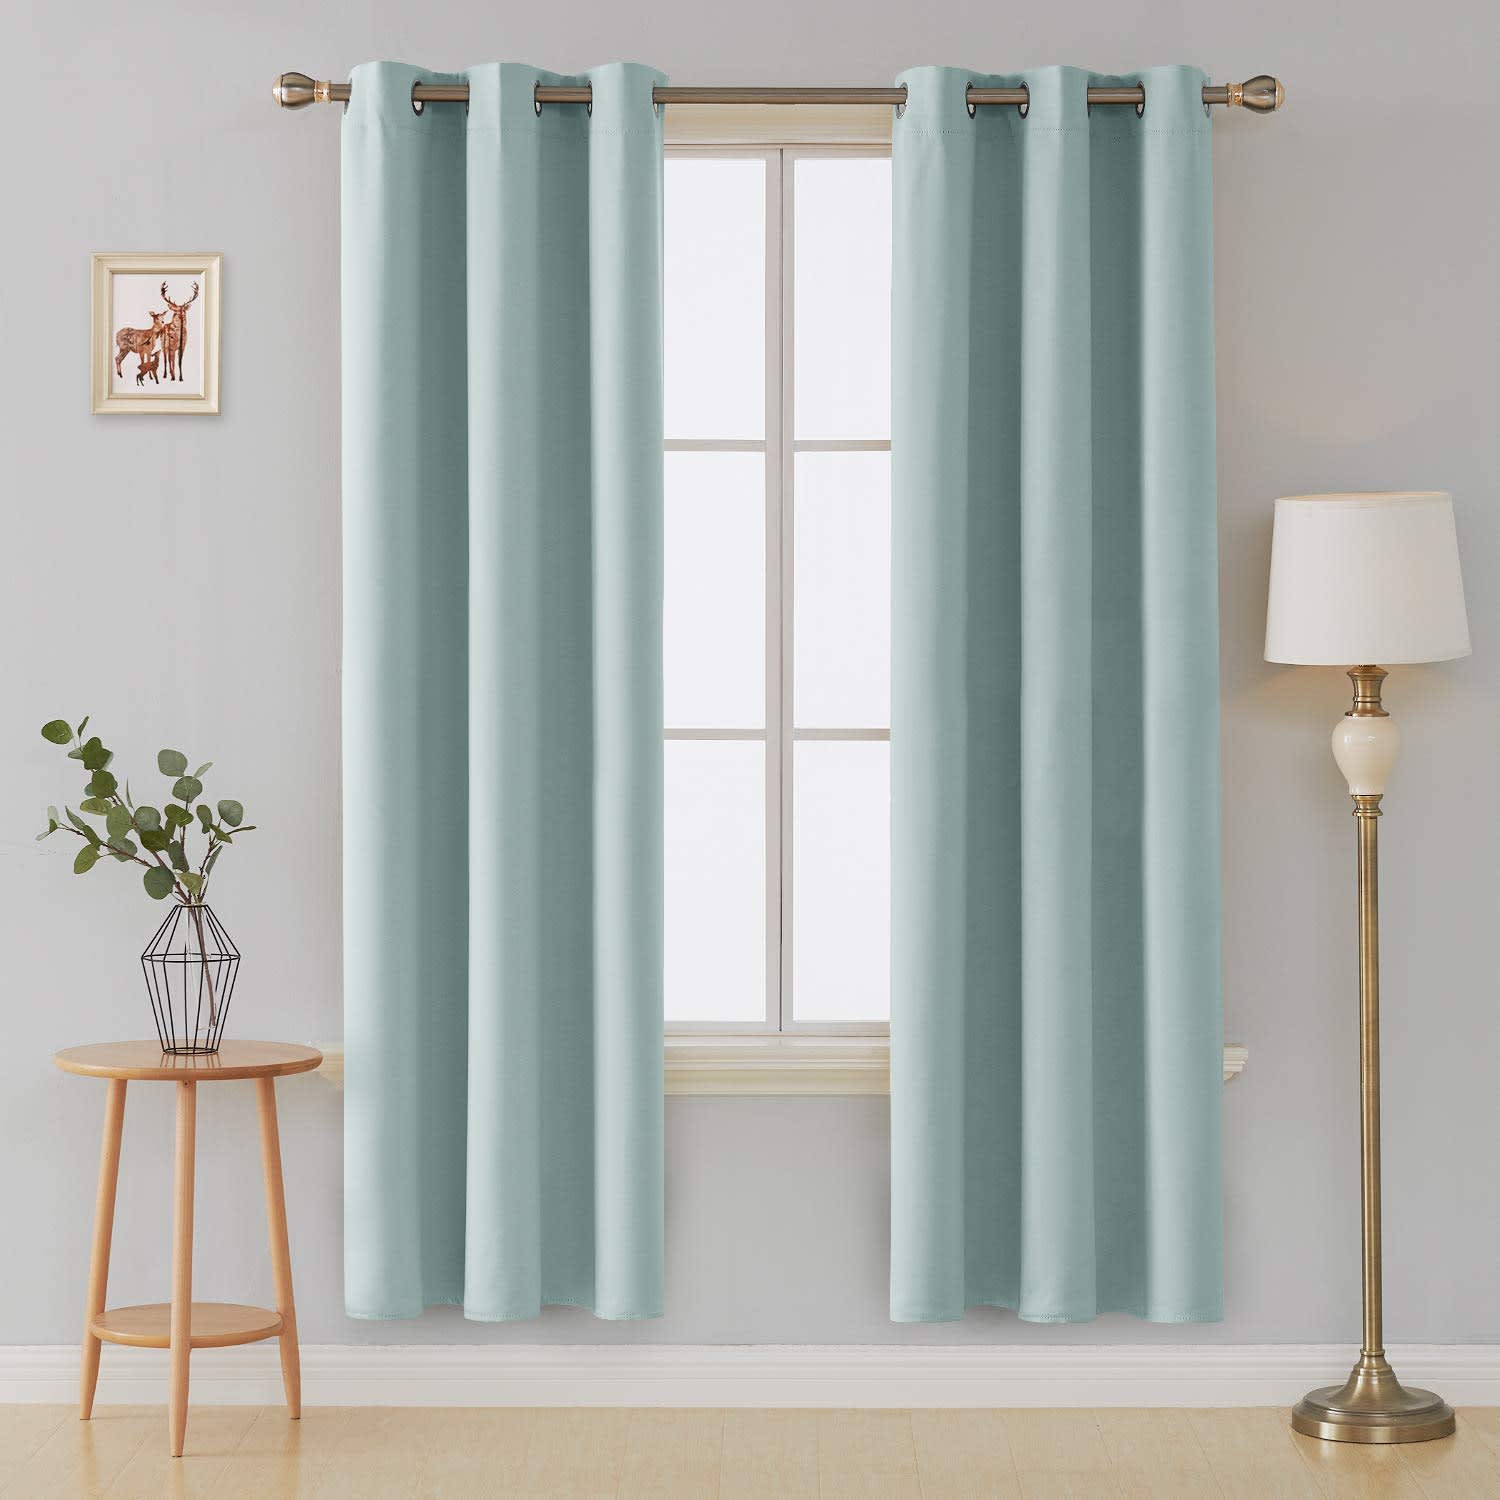 Best Cheap Blackout Curtains on Amazon | Apartment Therapy